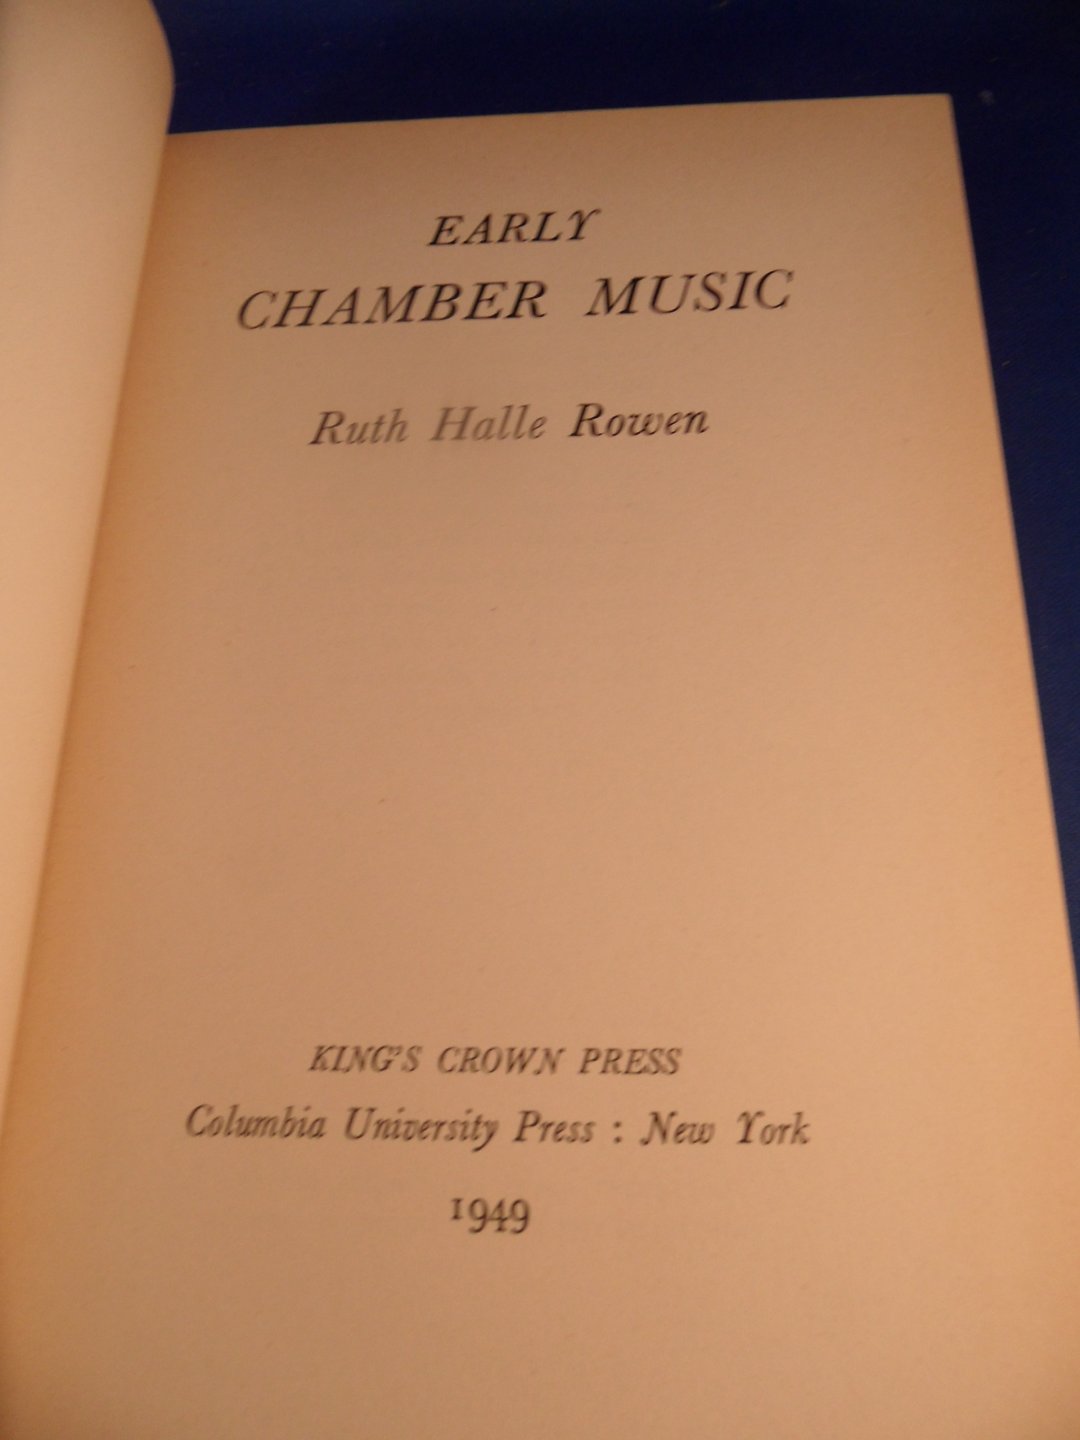 Rowen Ruth Halle - early chamber music